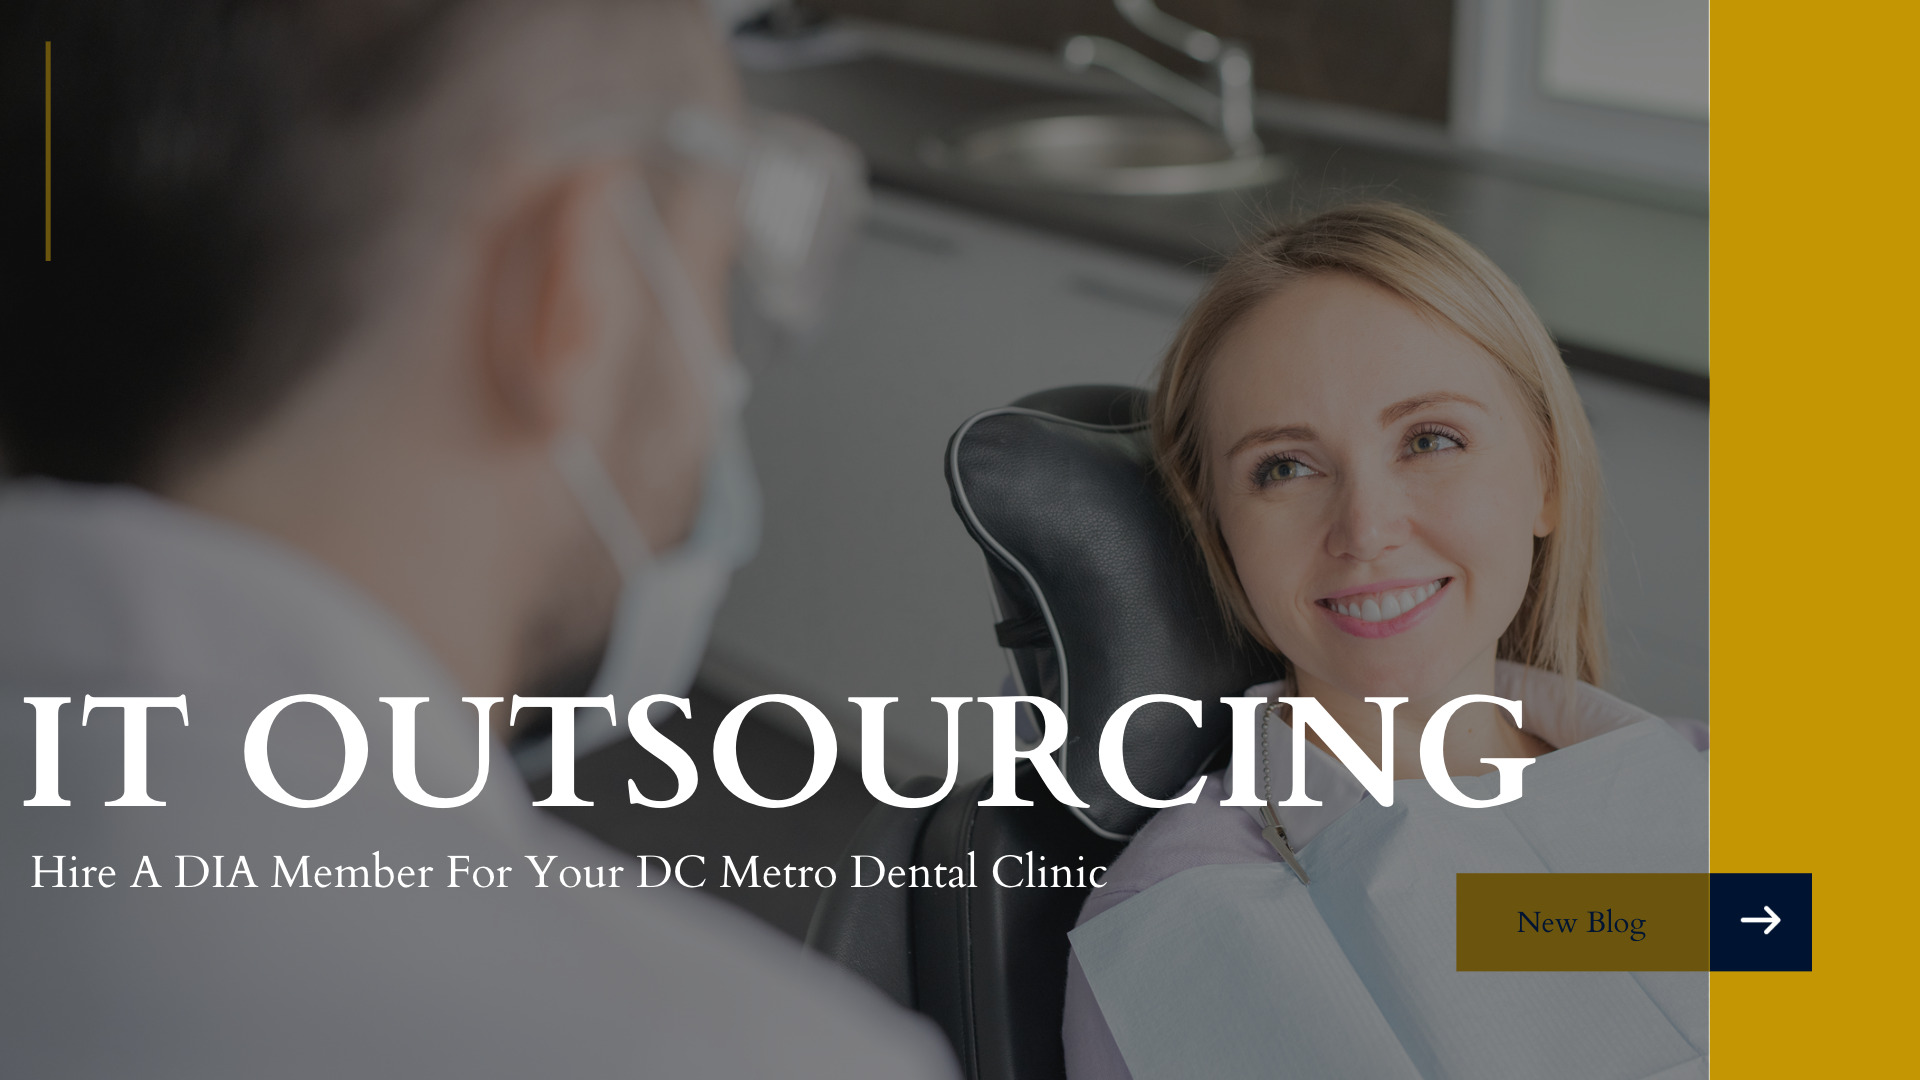 Why Dental Offices In The DC Metro Area Need To Outsource Their IT To A Dental Integrators Association Member